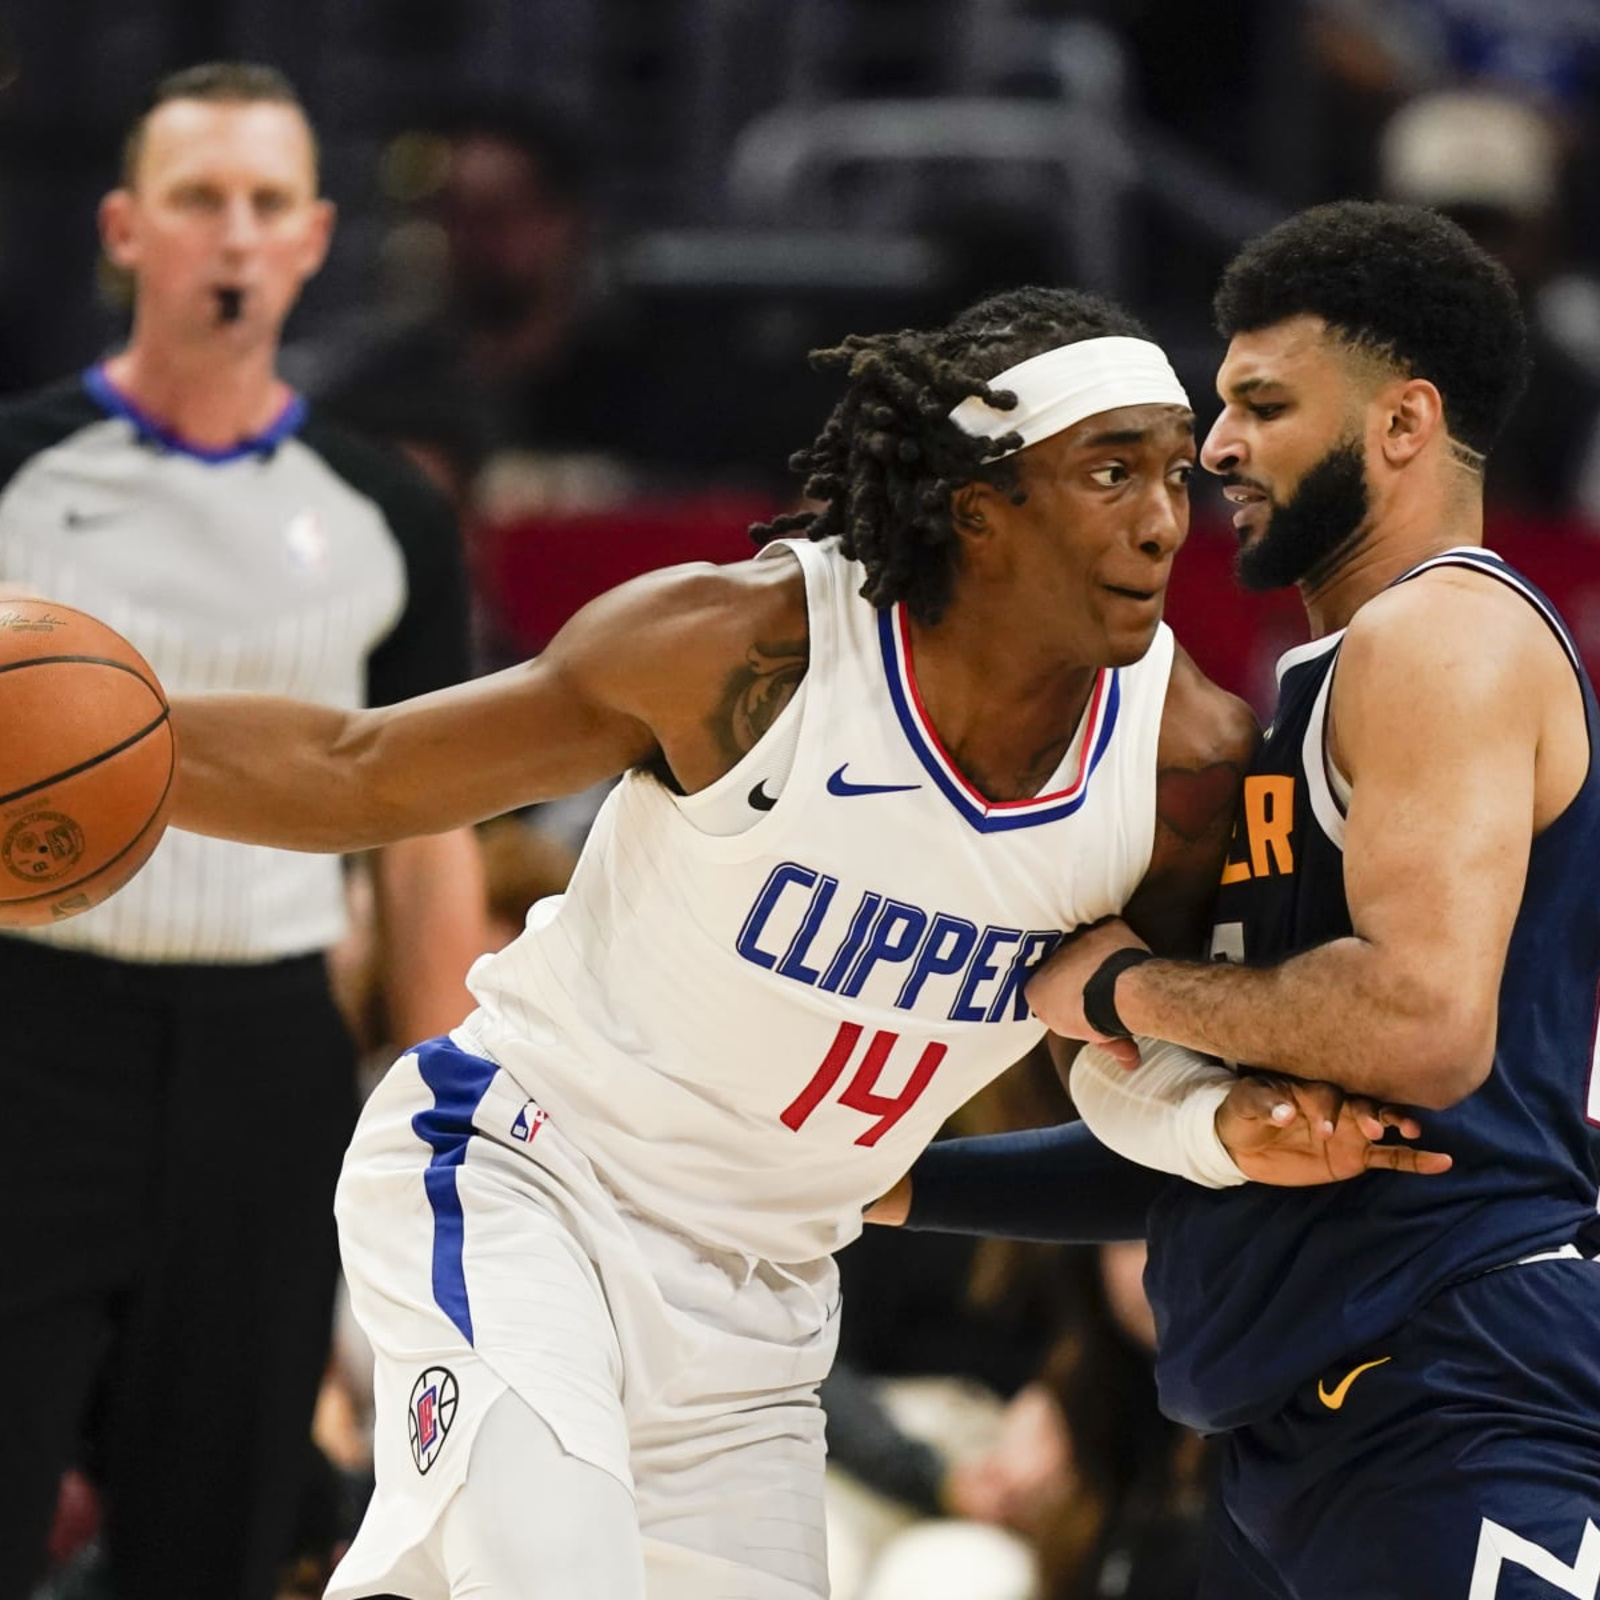 Clippers' Terance Mann responds to ongoing trade speculation